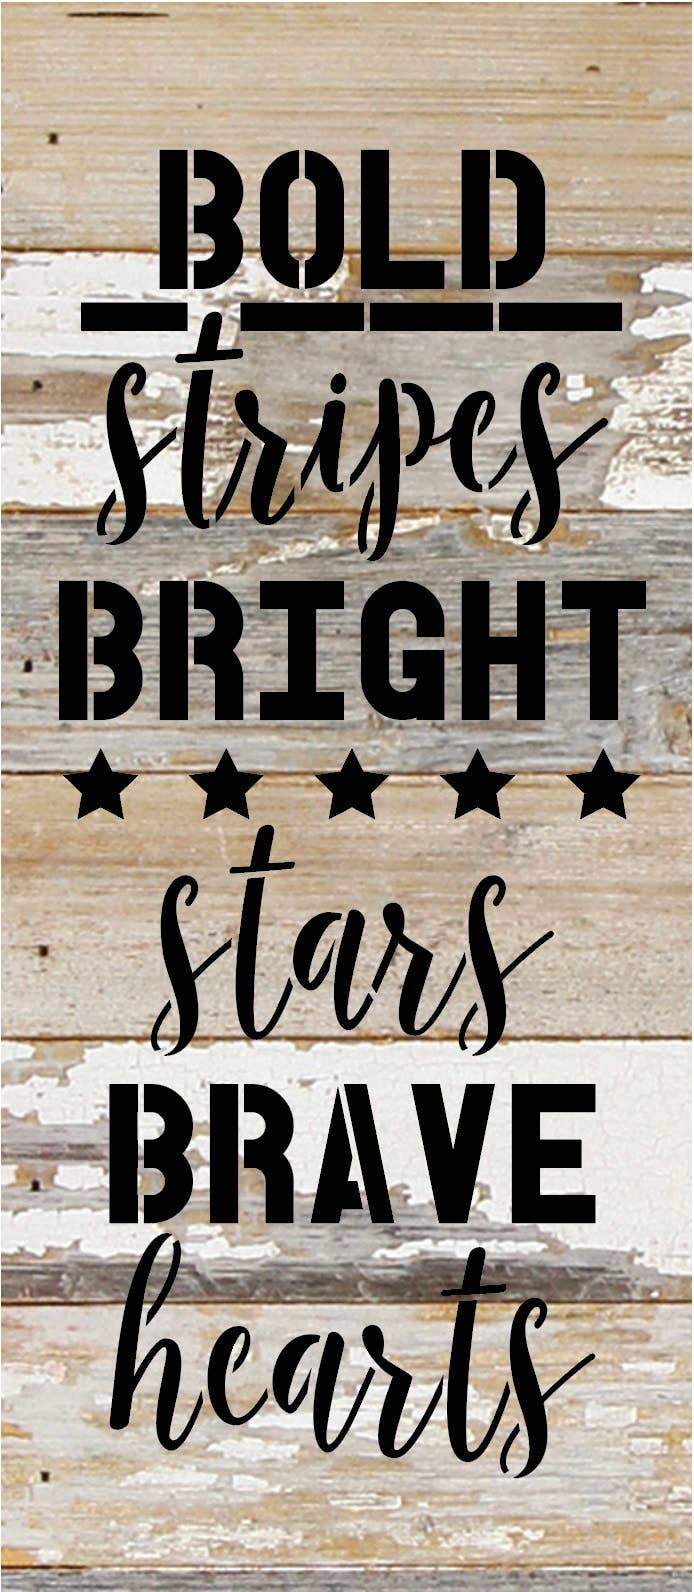 Bold Stripes Bright Stars Brave Hearts / 6"X14" Reclaimed Wood Sign